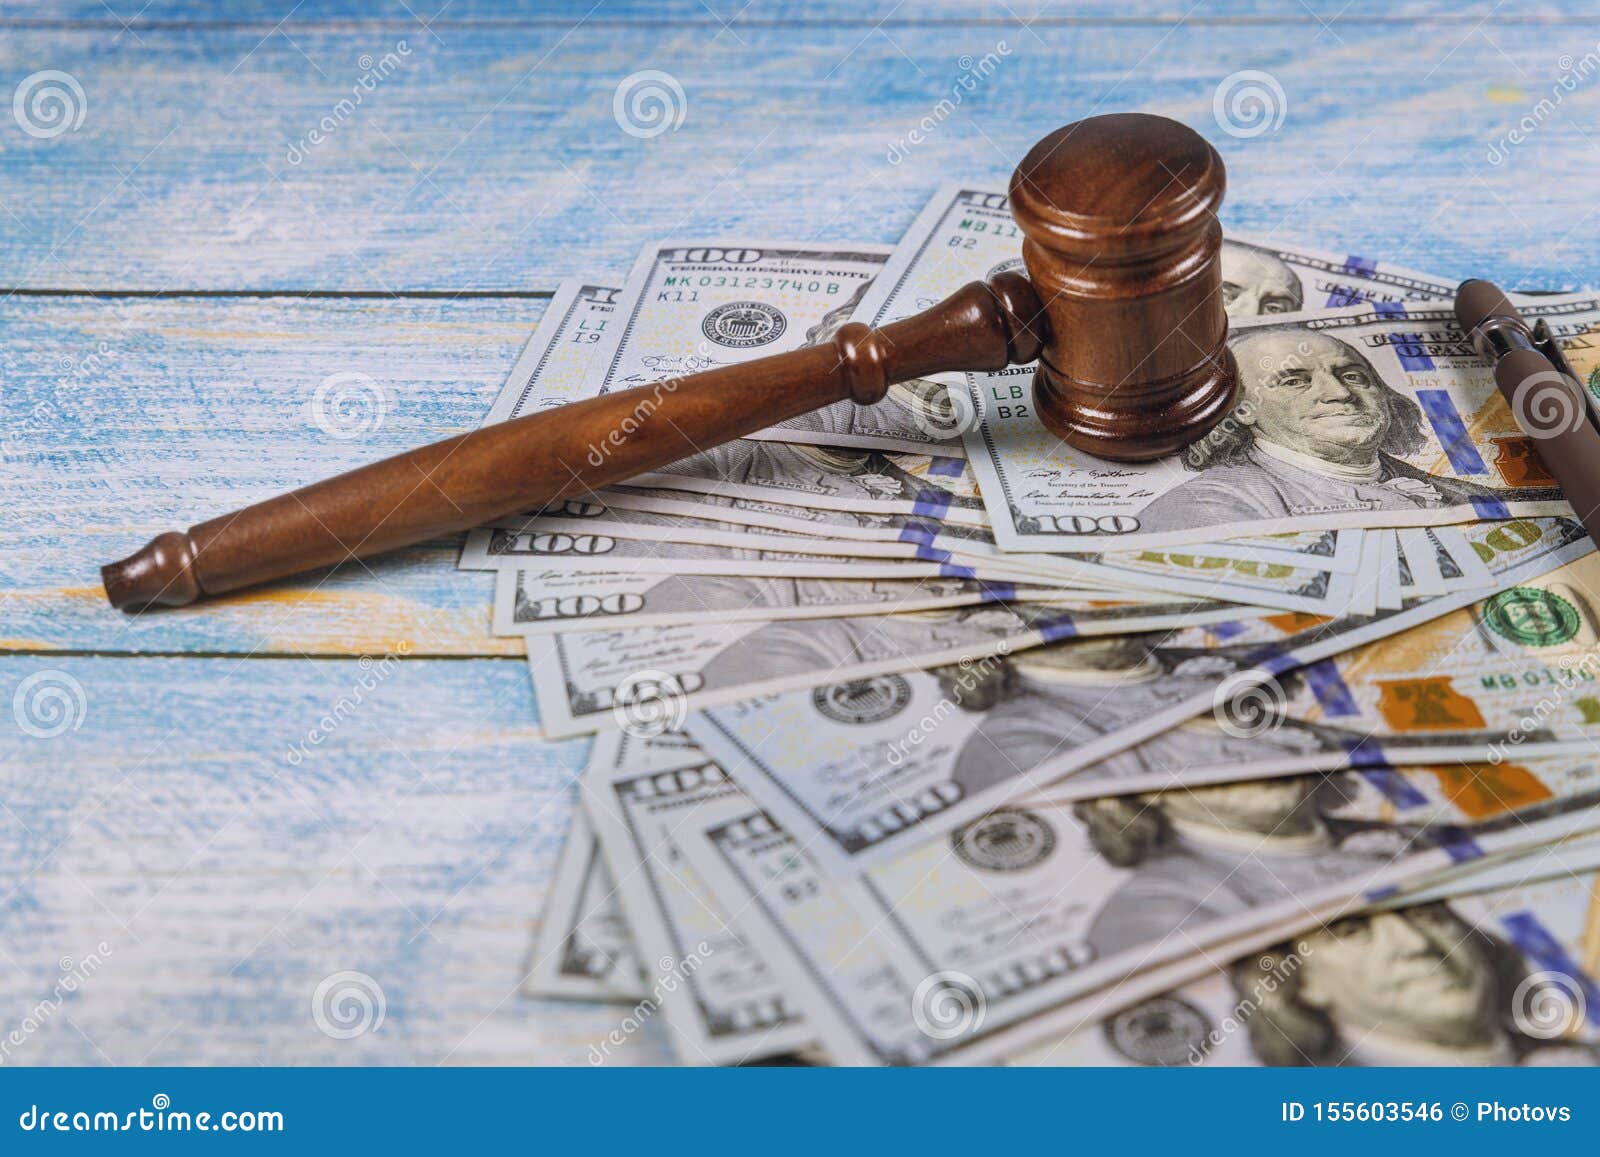 the judge& x27;s gavel, banknotes of american dollars on the business, finance corruption money financial crime